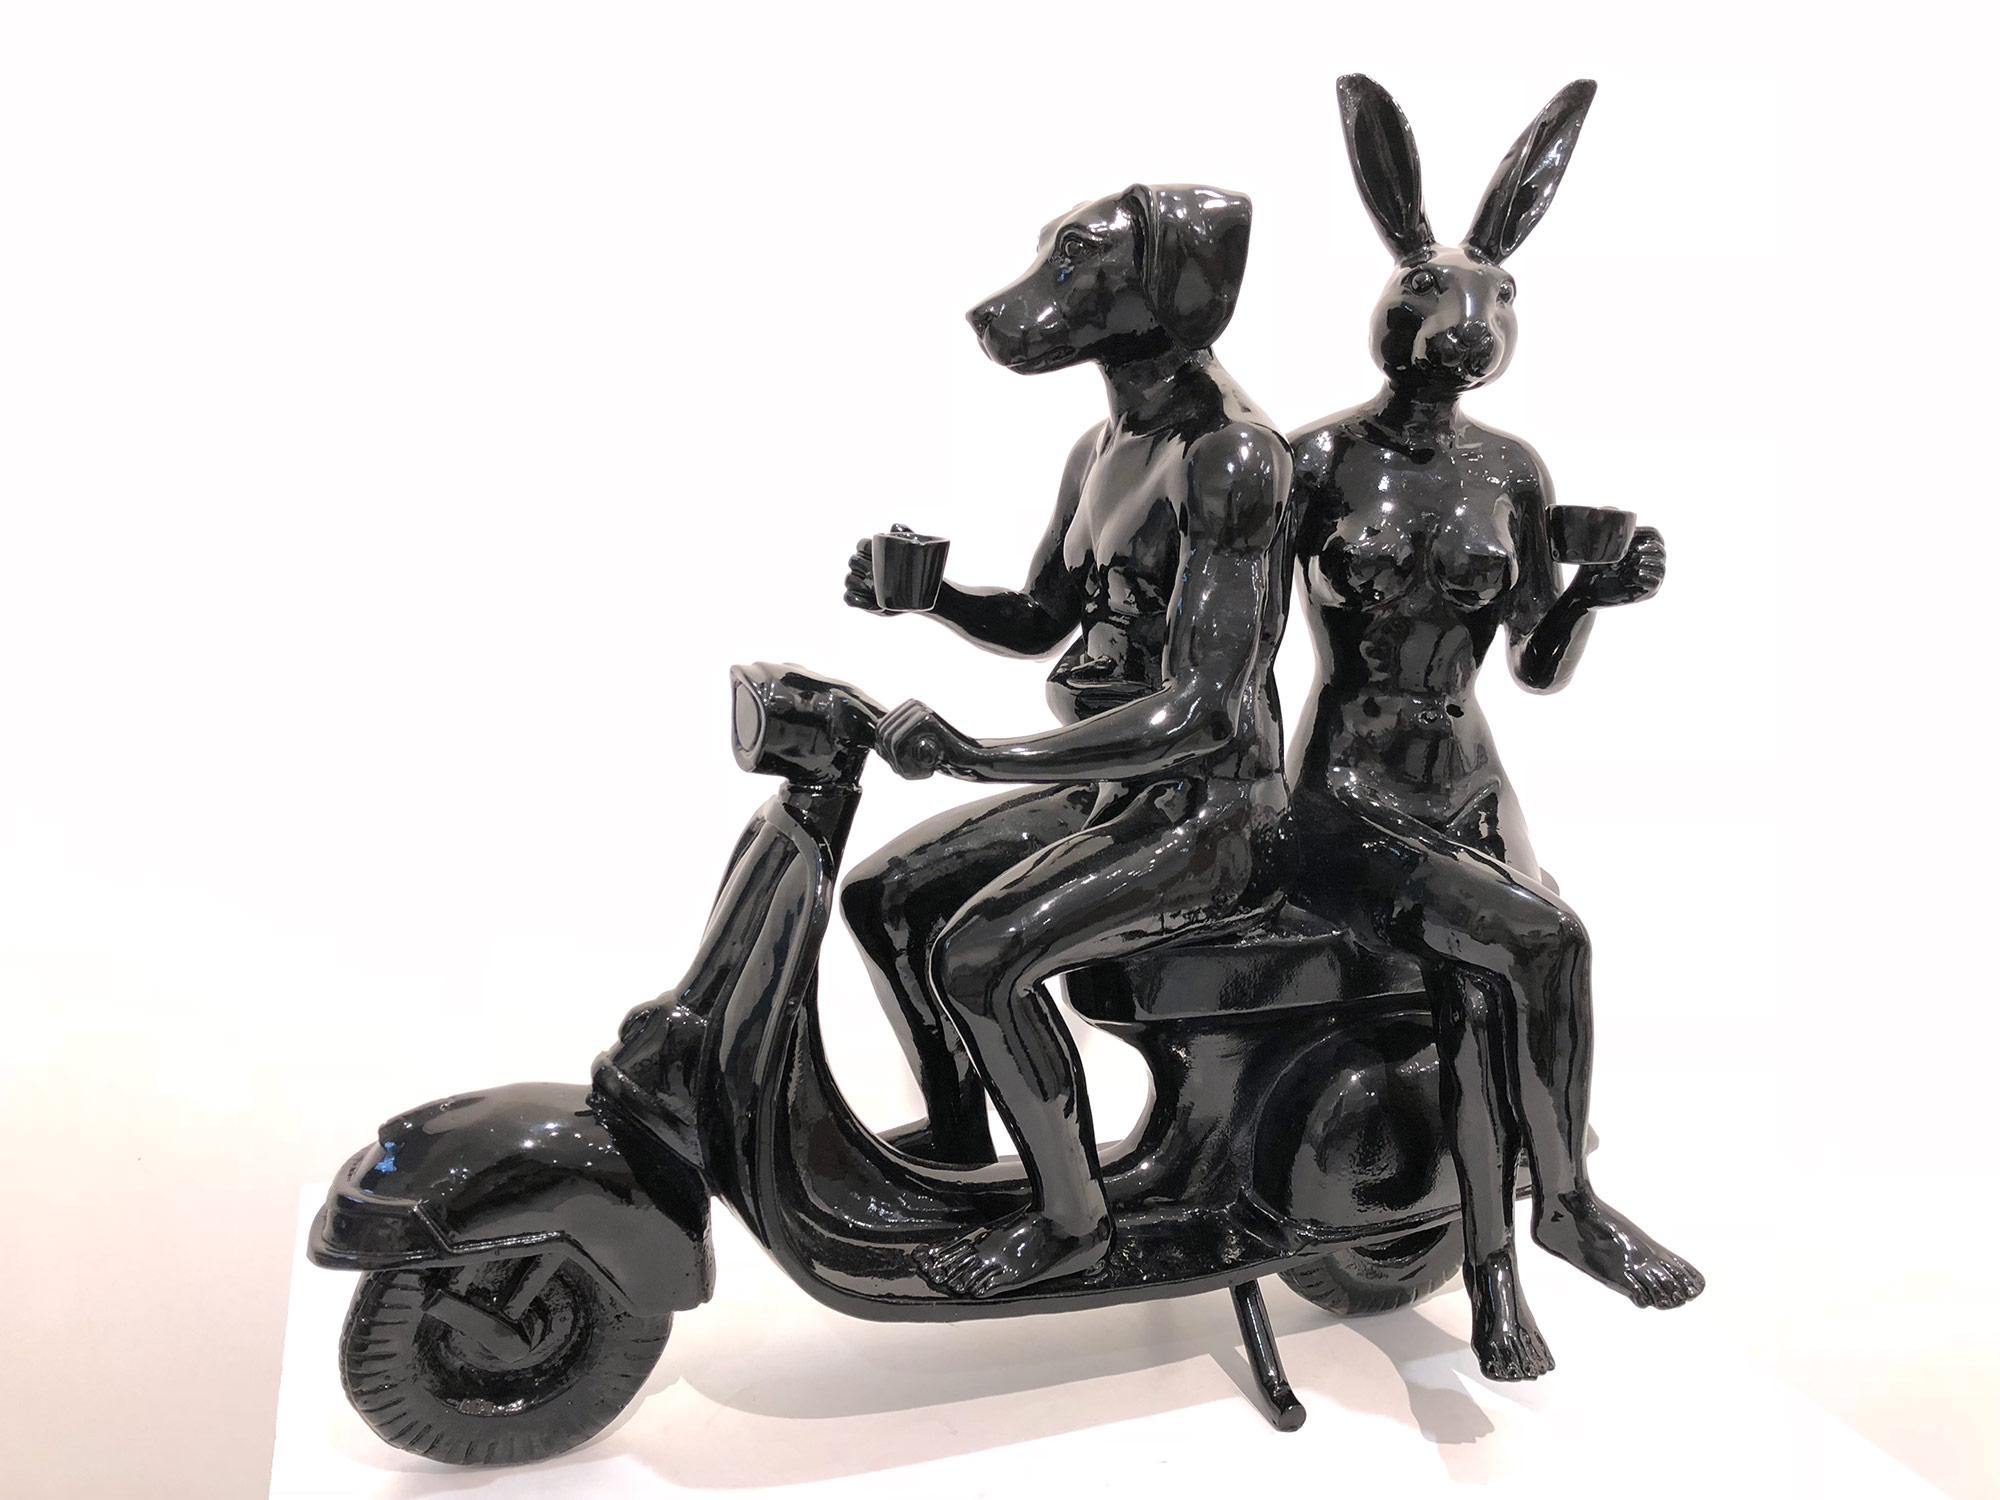 He Often Got Lost but She was Happy to Spend More Time Together - Sculpture by Gillie and Marc Schattner